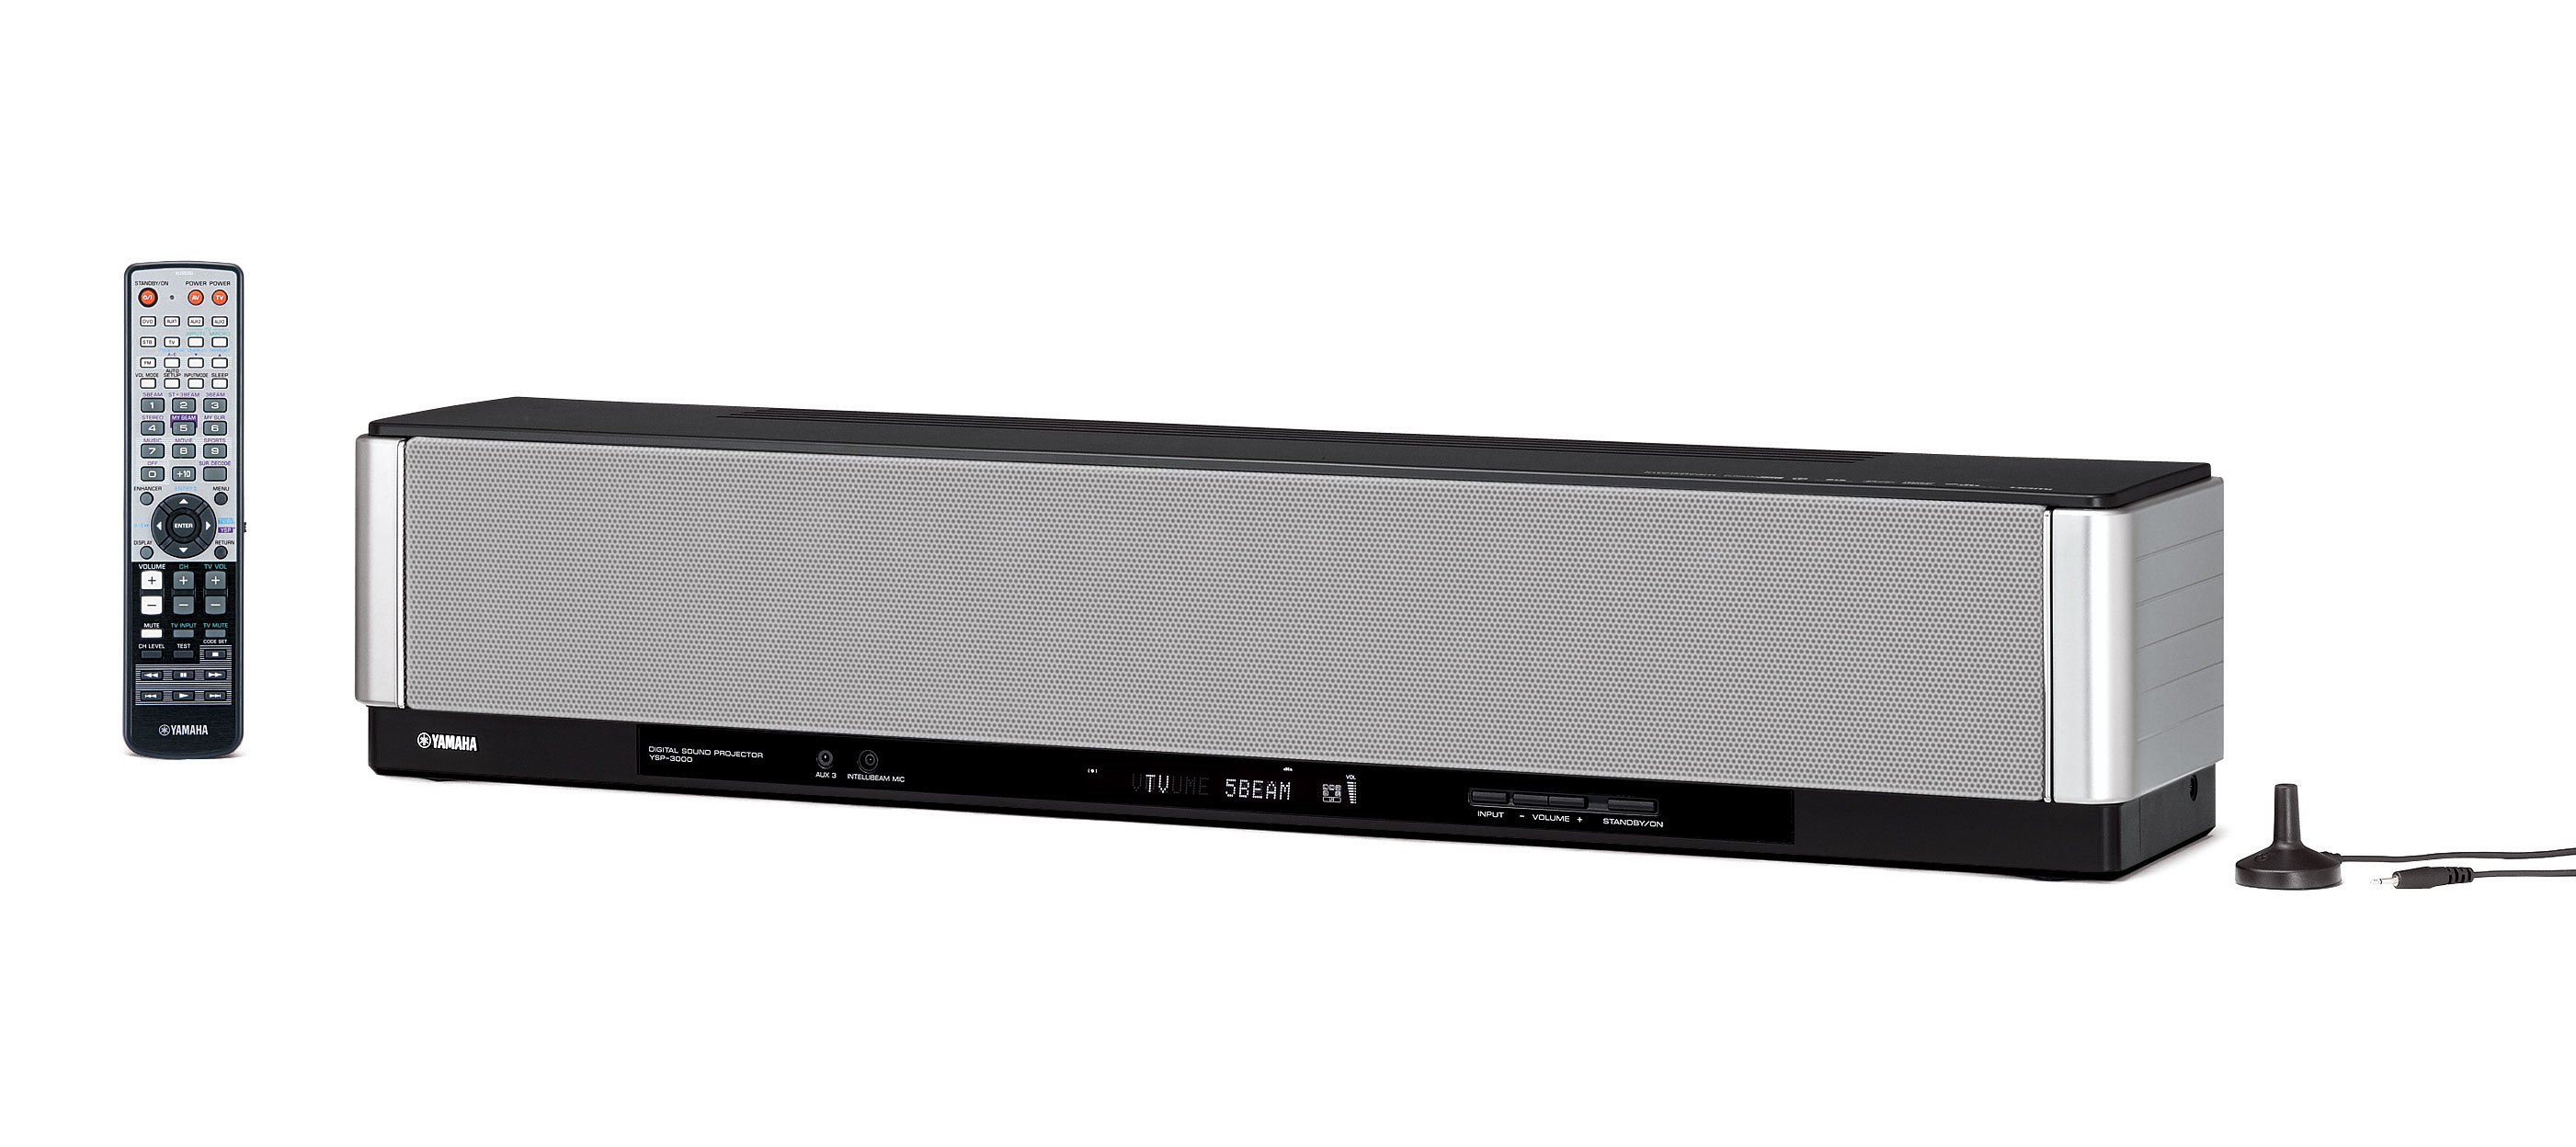 YSP-3000 - Overview - Sound Bar - Audio & Visual - Products - Yamaha